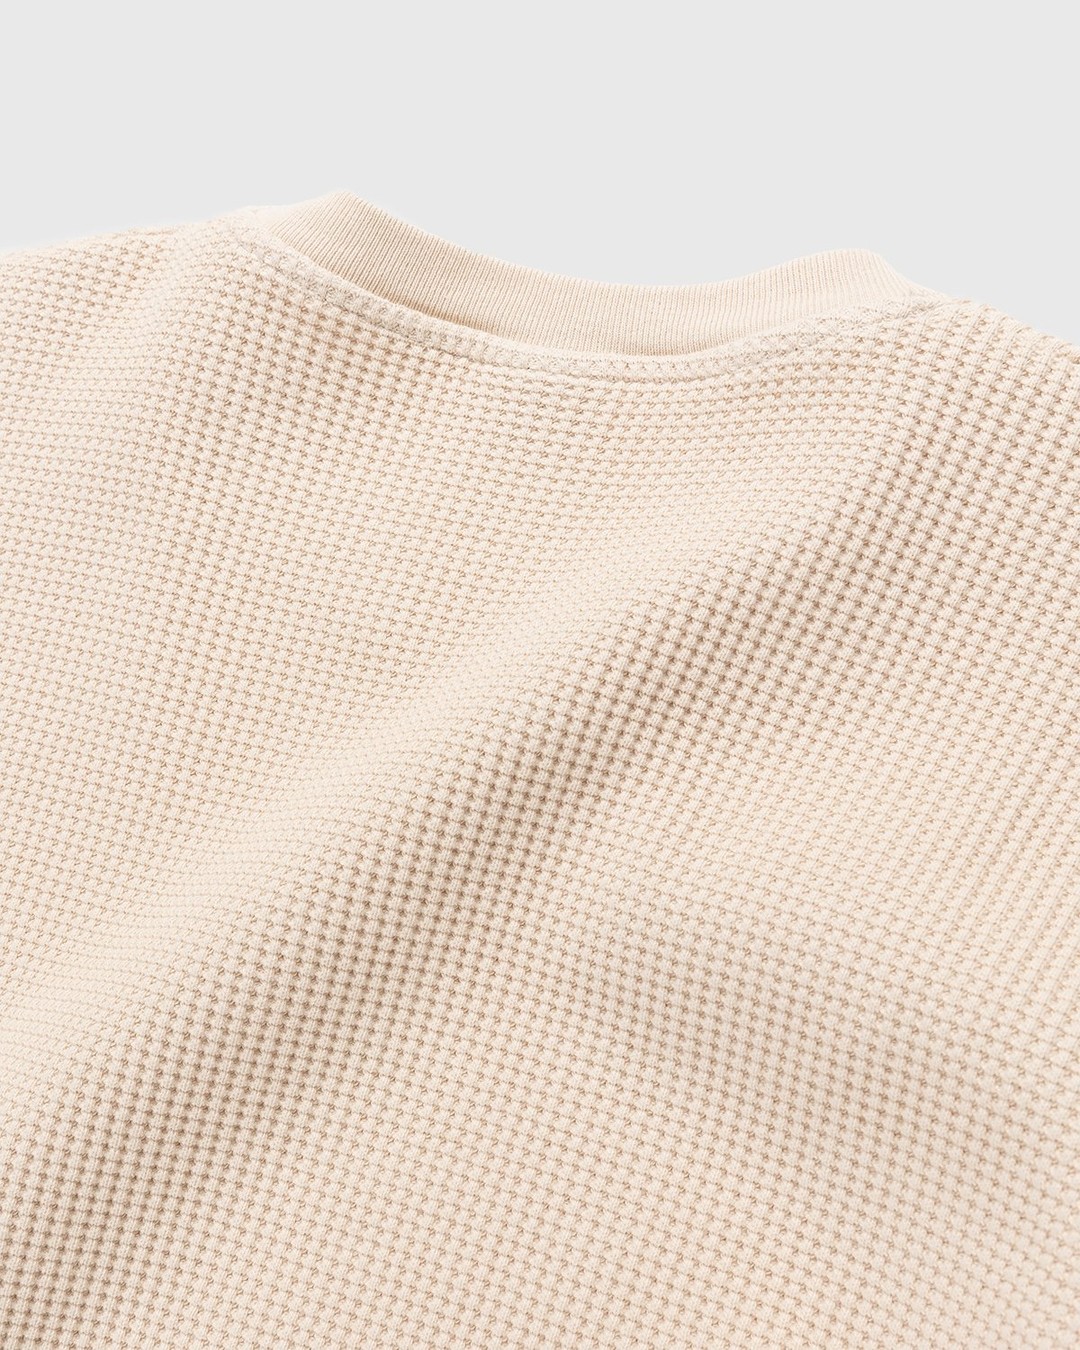 Highsnobiety – Thermal Staples Long Sleeve Off White - Sweats - Beige - Image 3